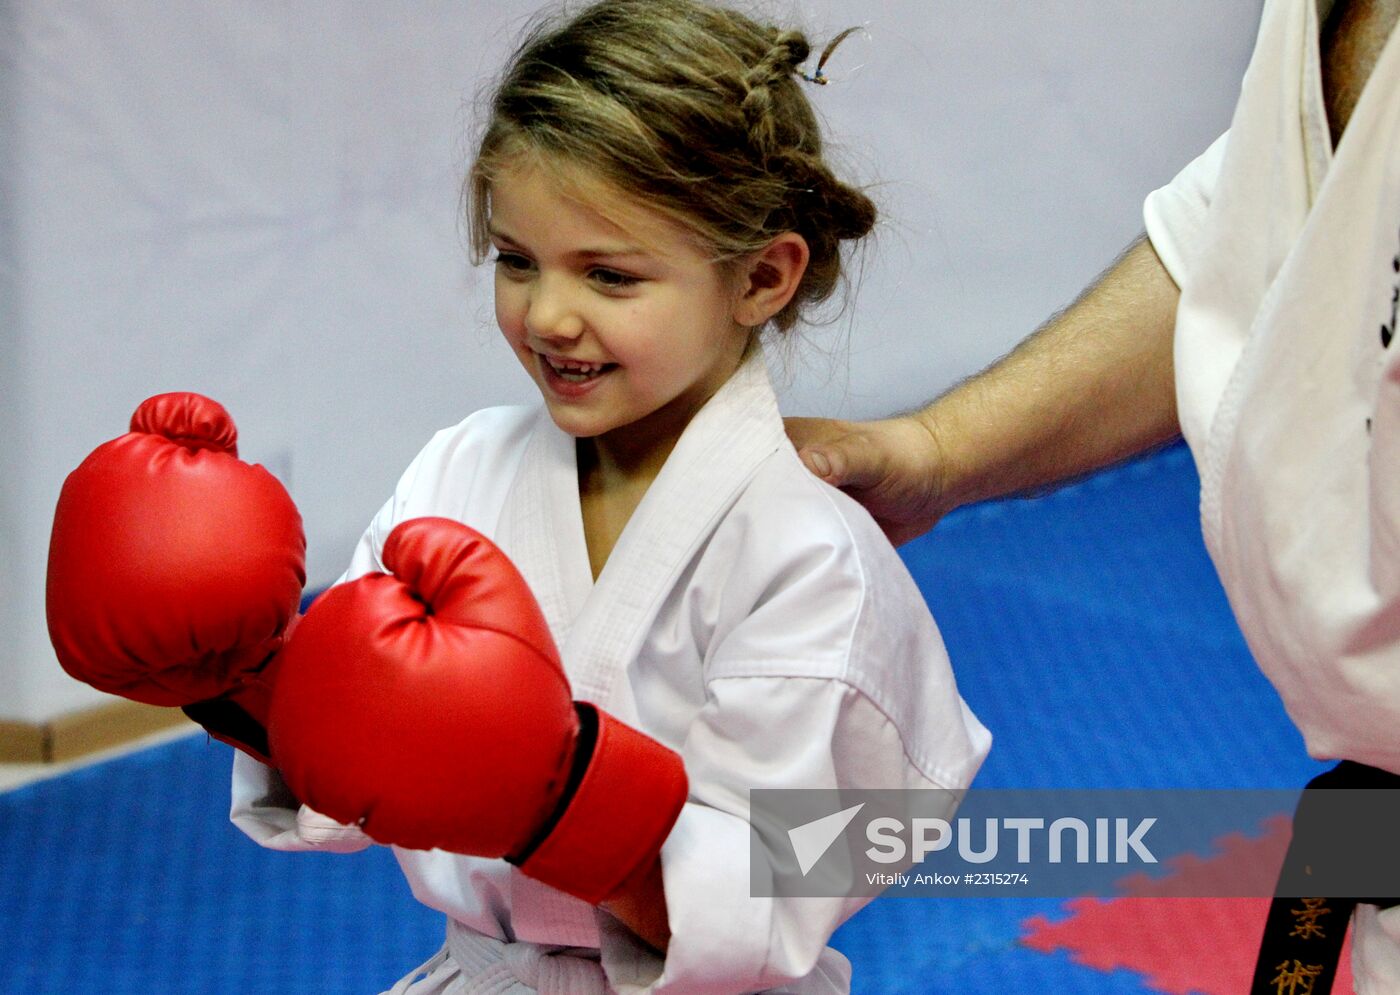 Martial arts classes for children and young people